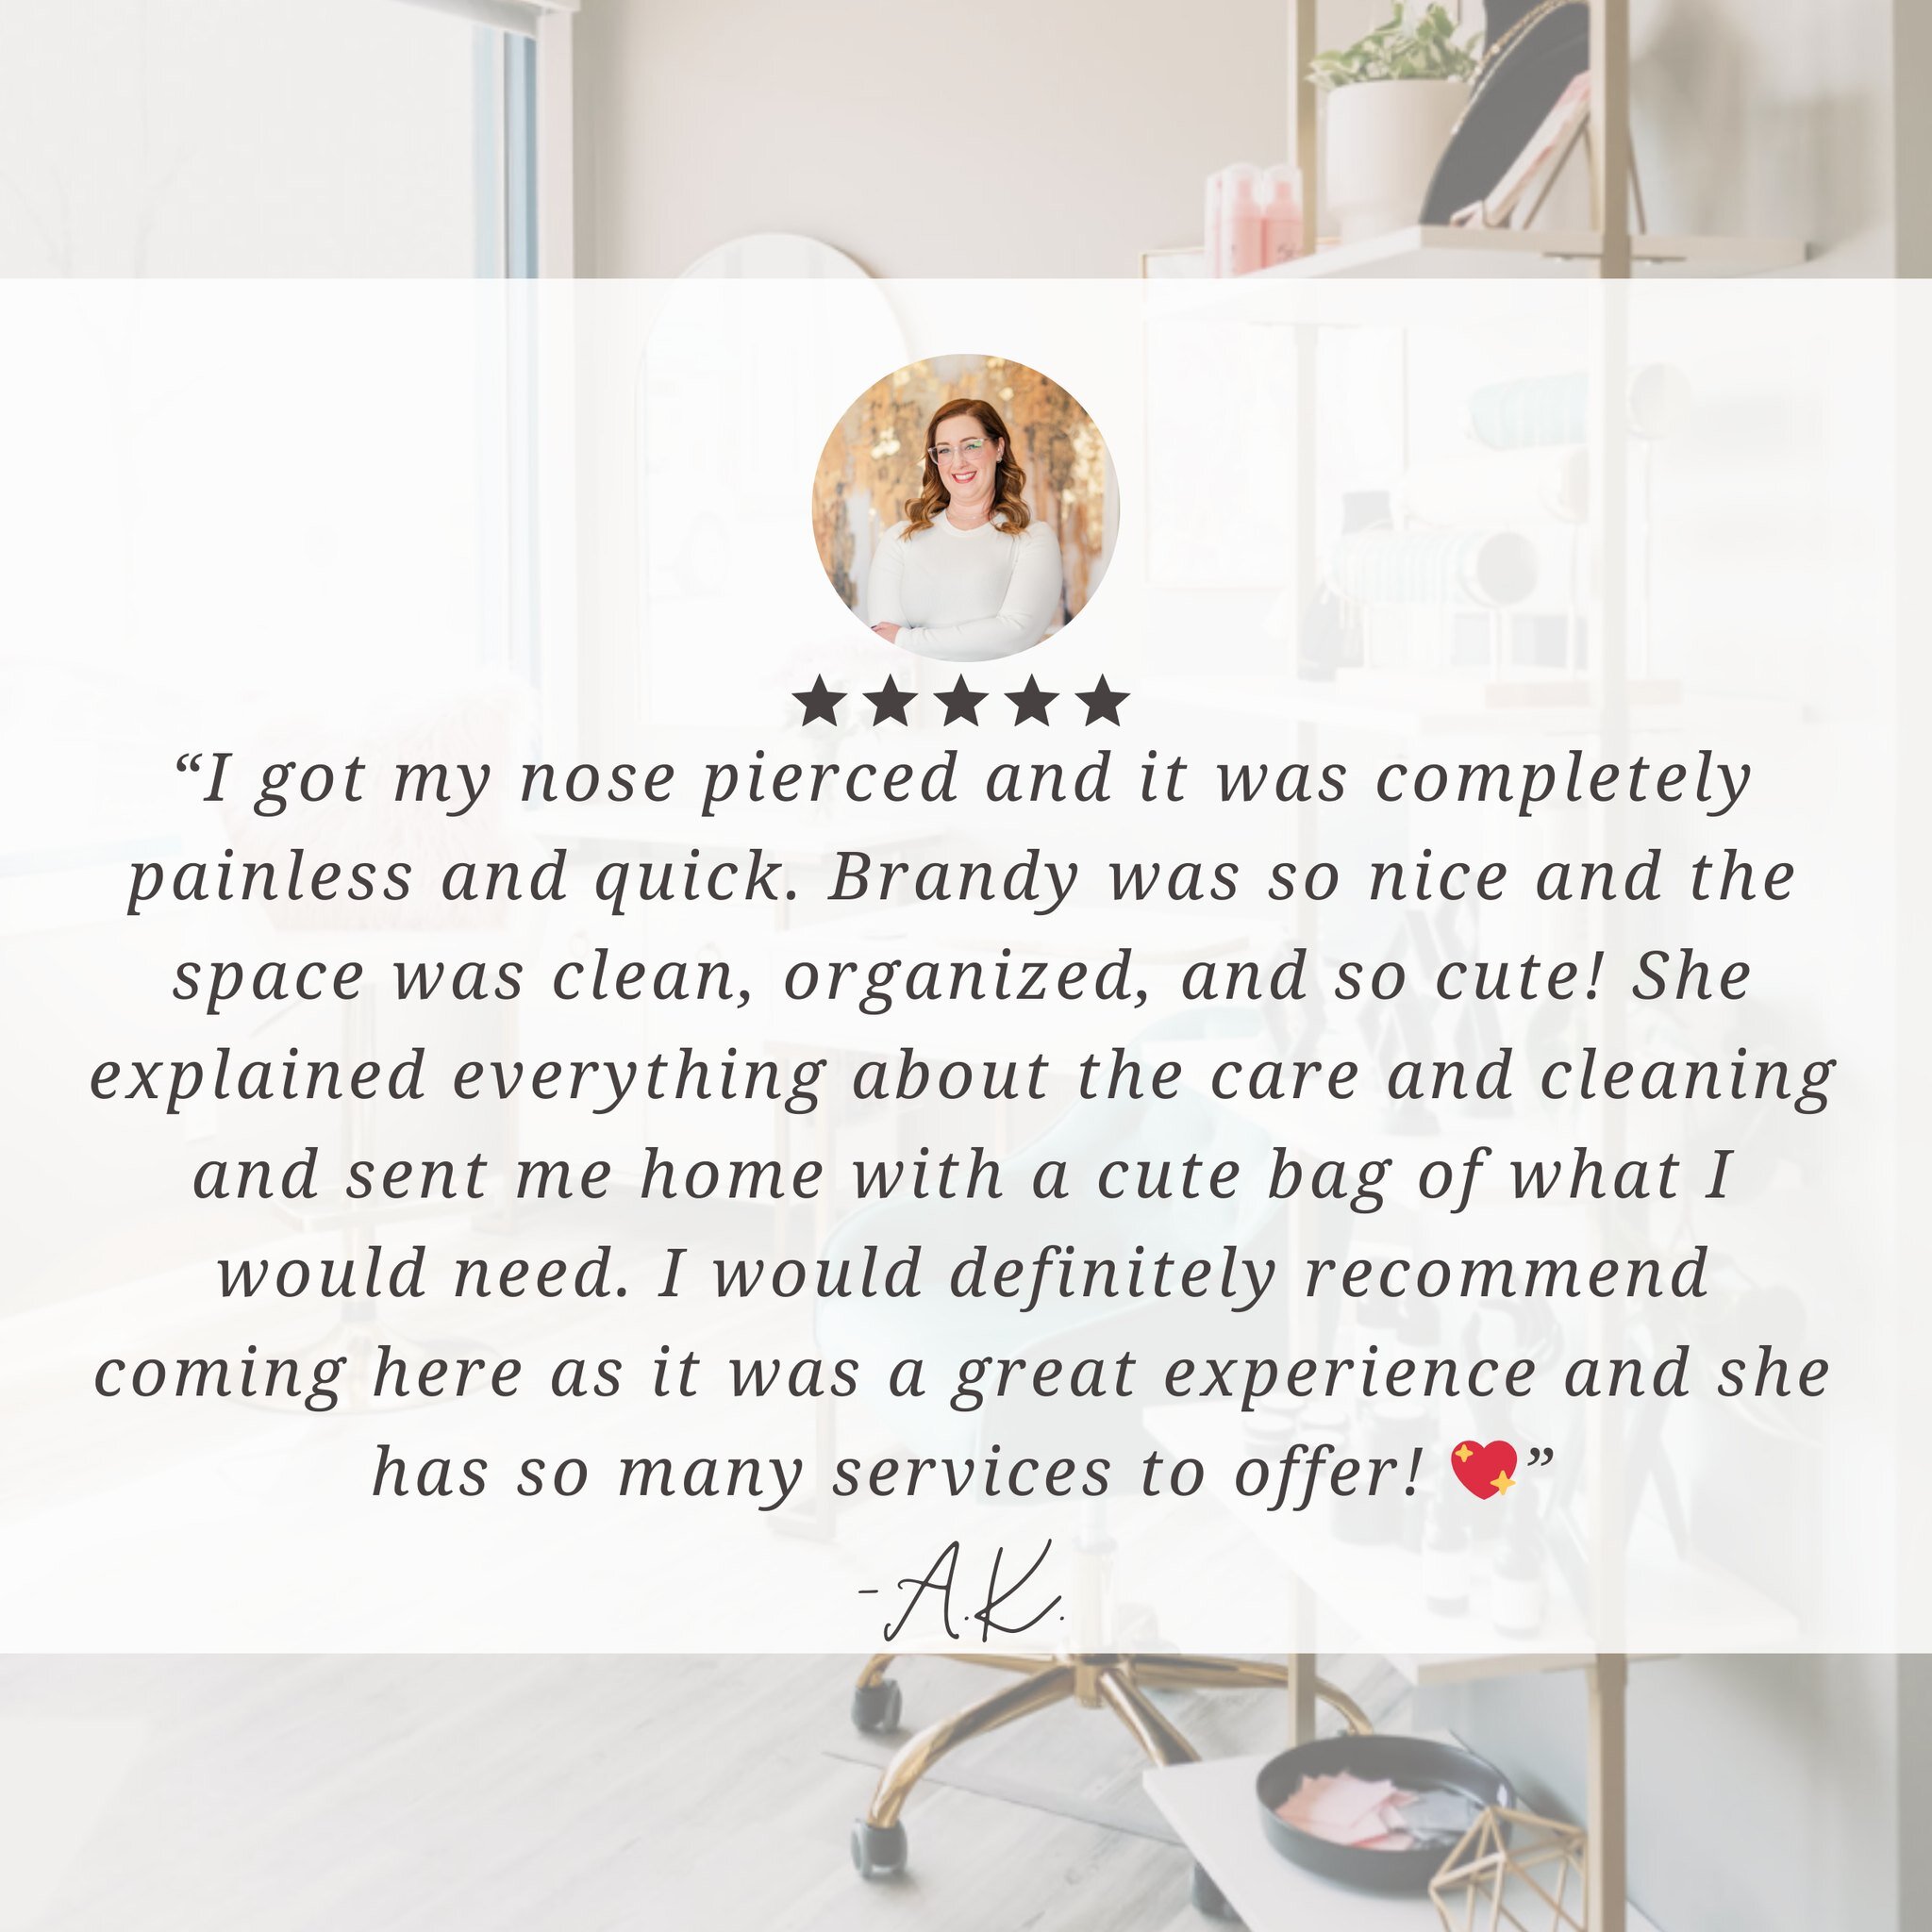 Have you had 5 star service from Brandy!? ✨ If so, we would LOVE for you to take a moment and leave Meadow and Charm a ⭐️ 5 STAR REVIEW ⭐️ here:

https://g.page/r/CYRDx7_3GHmIEBM/review